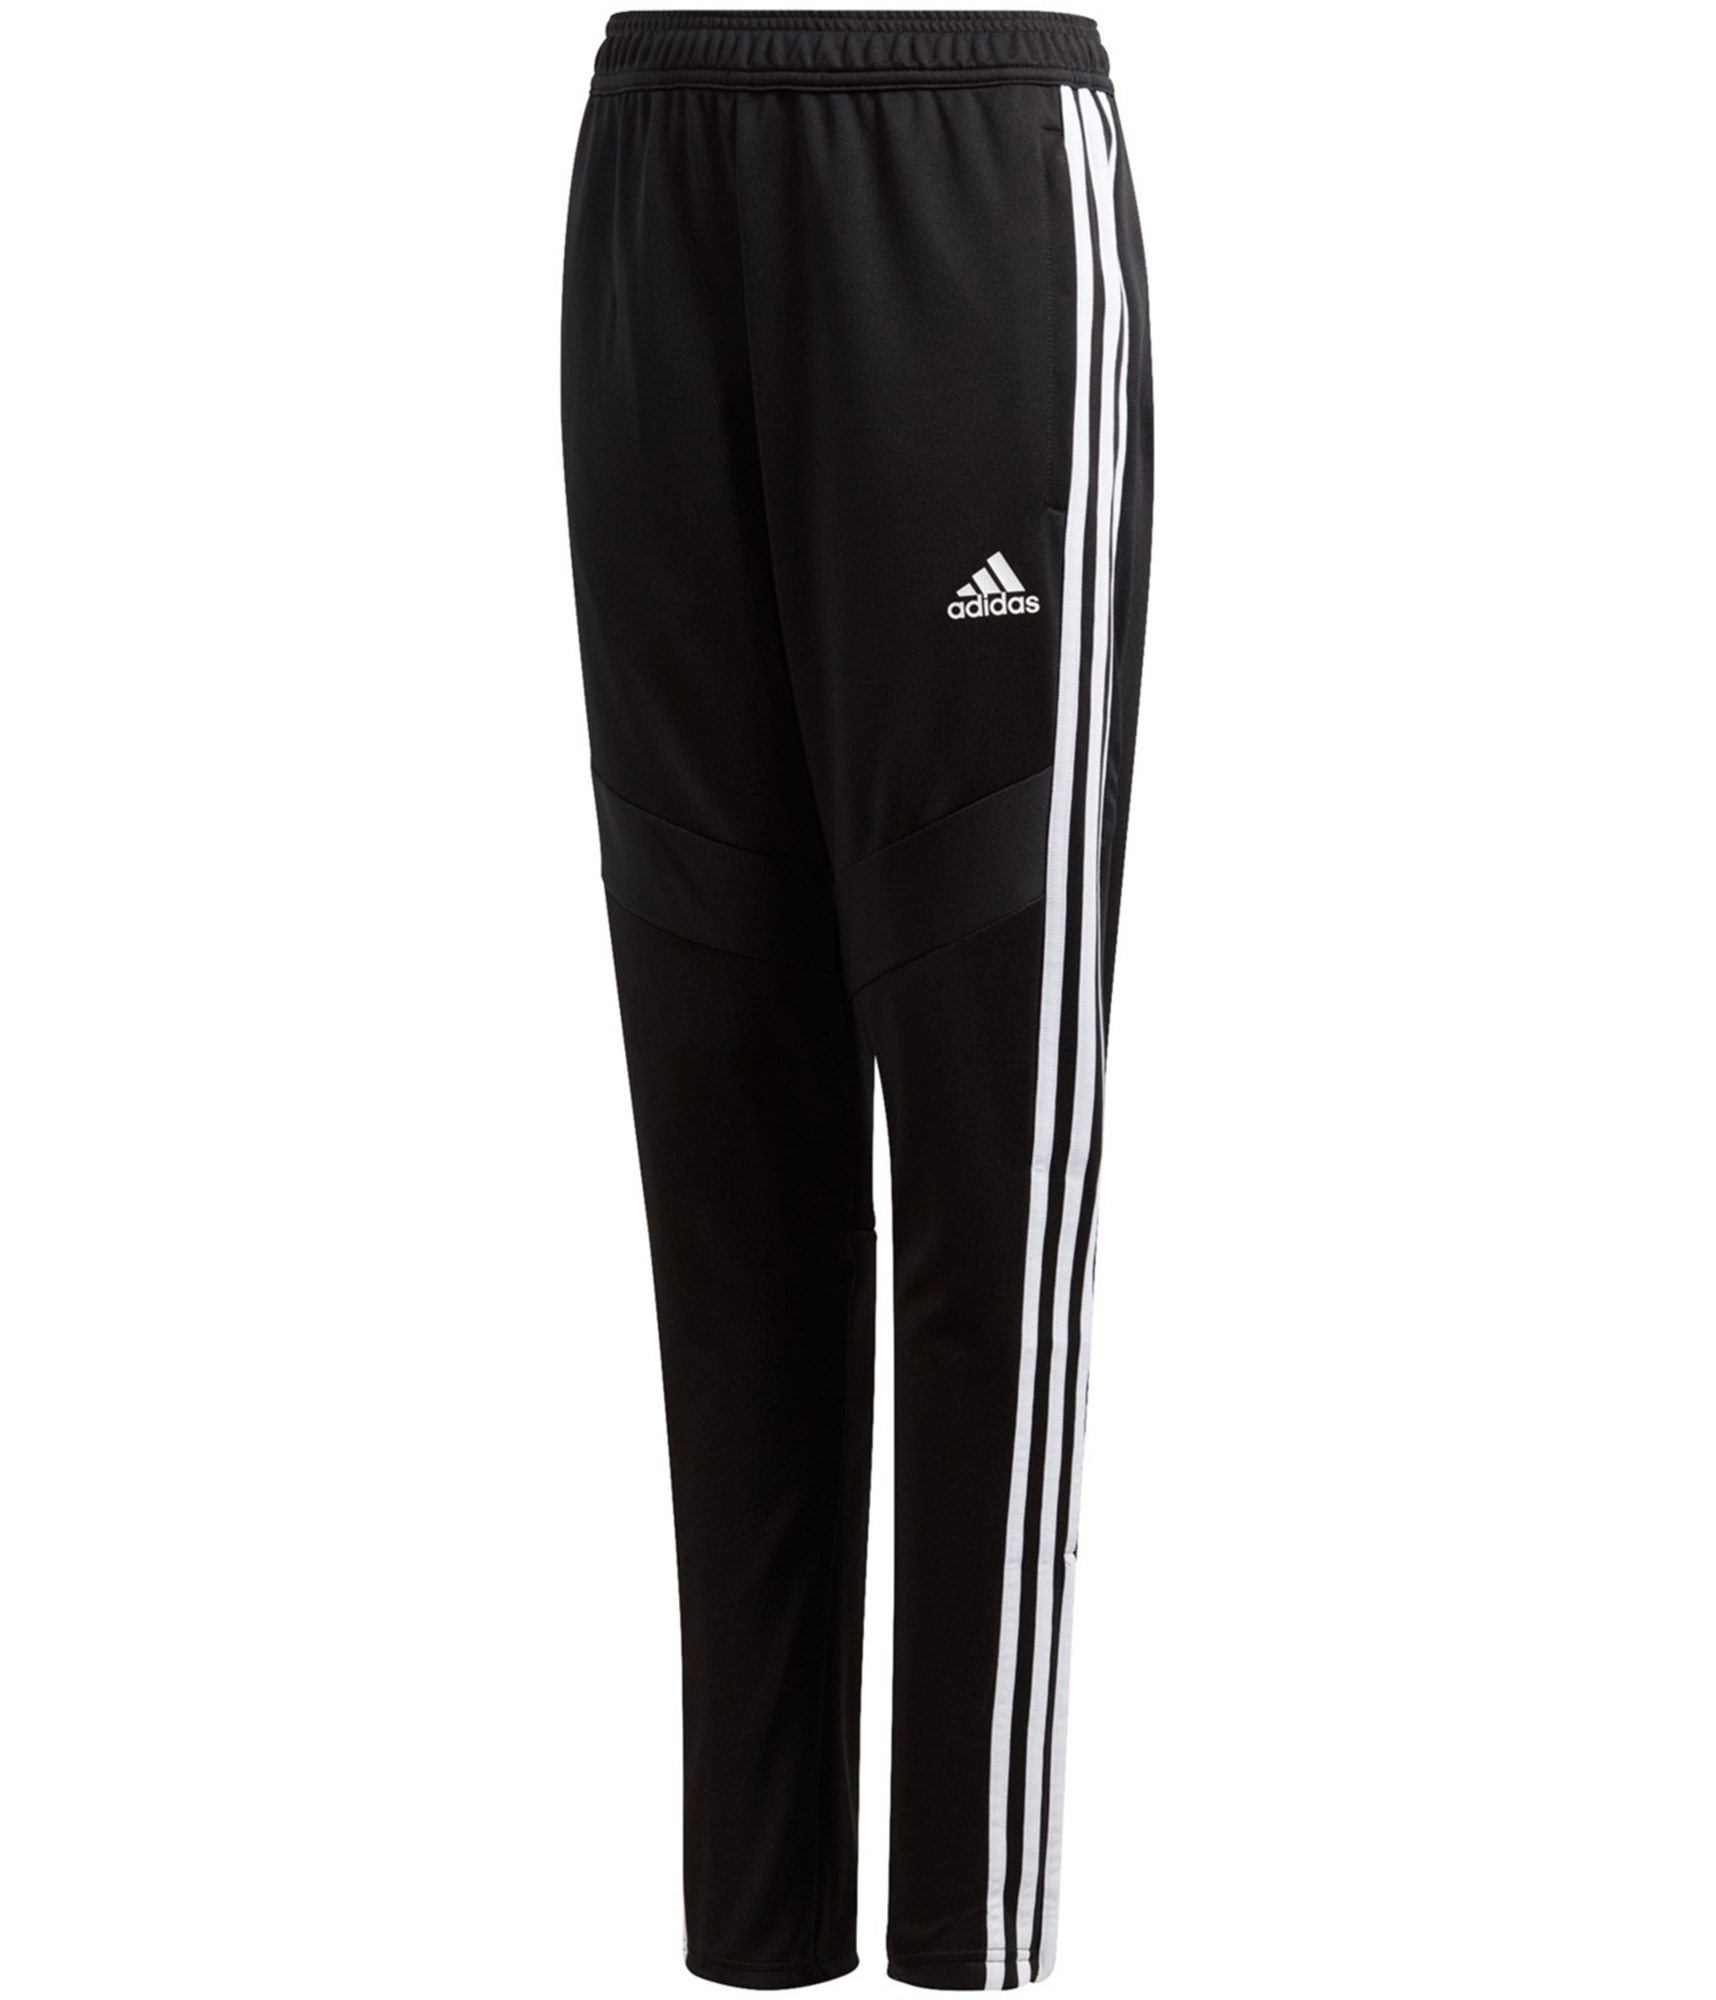 adidas Pro Model - White – RvceShops - adidas tnt tape wind track pants  size guide chart